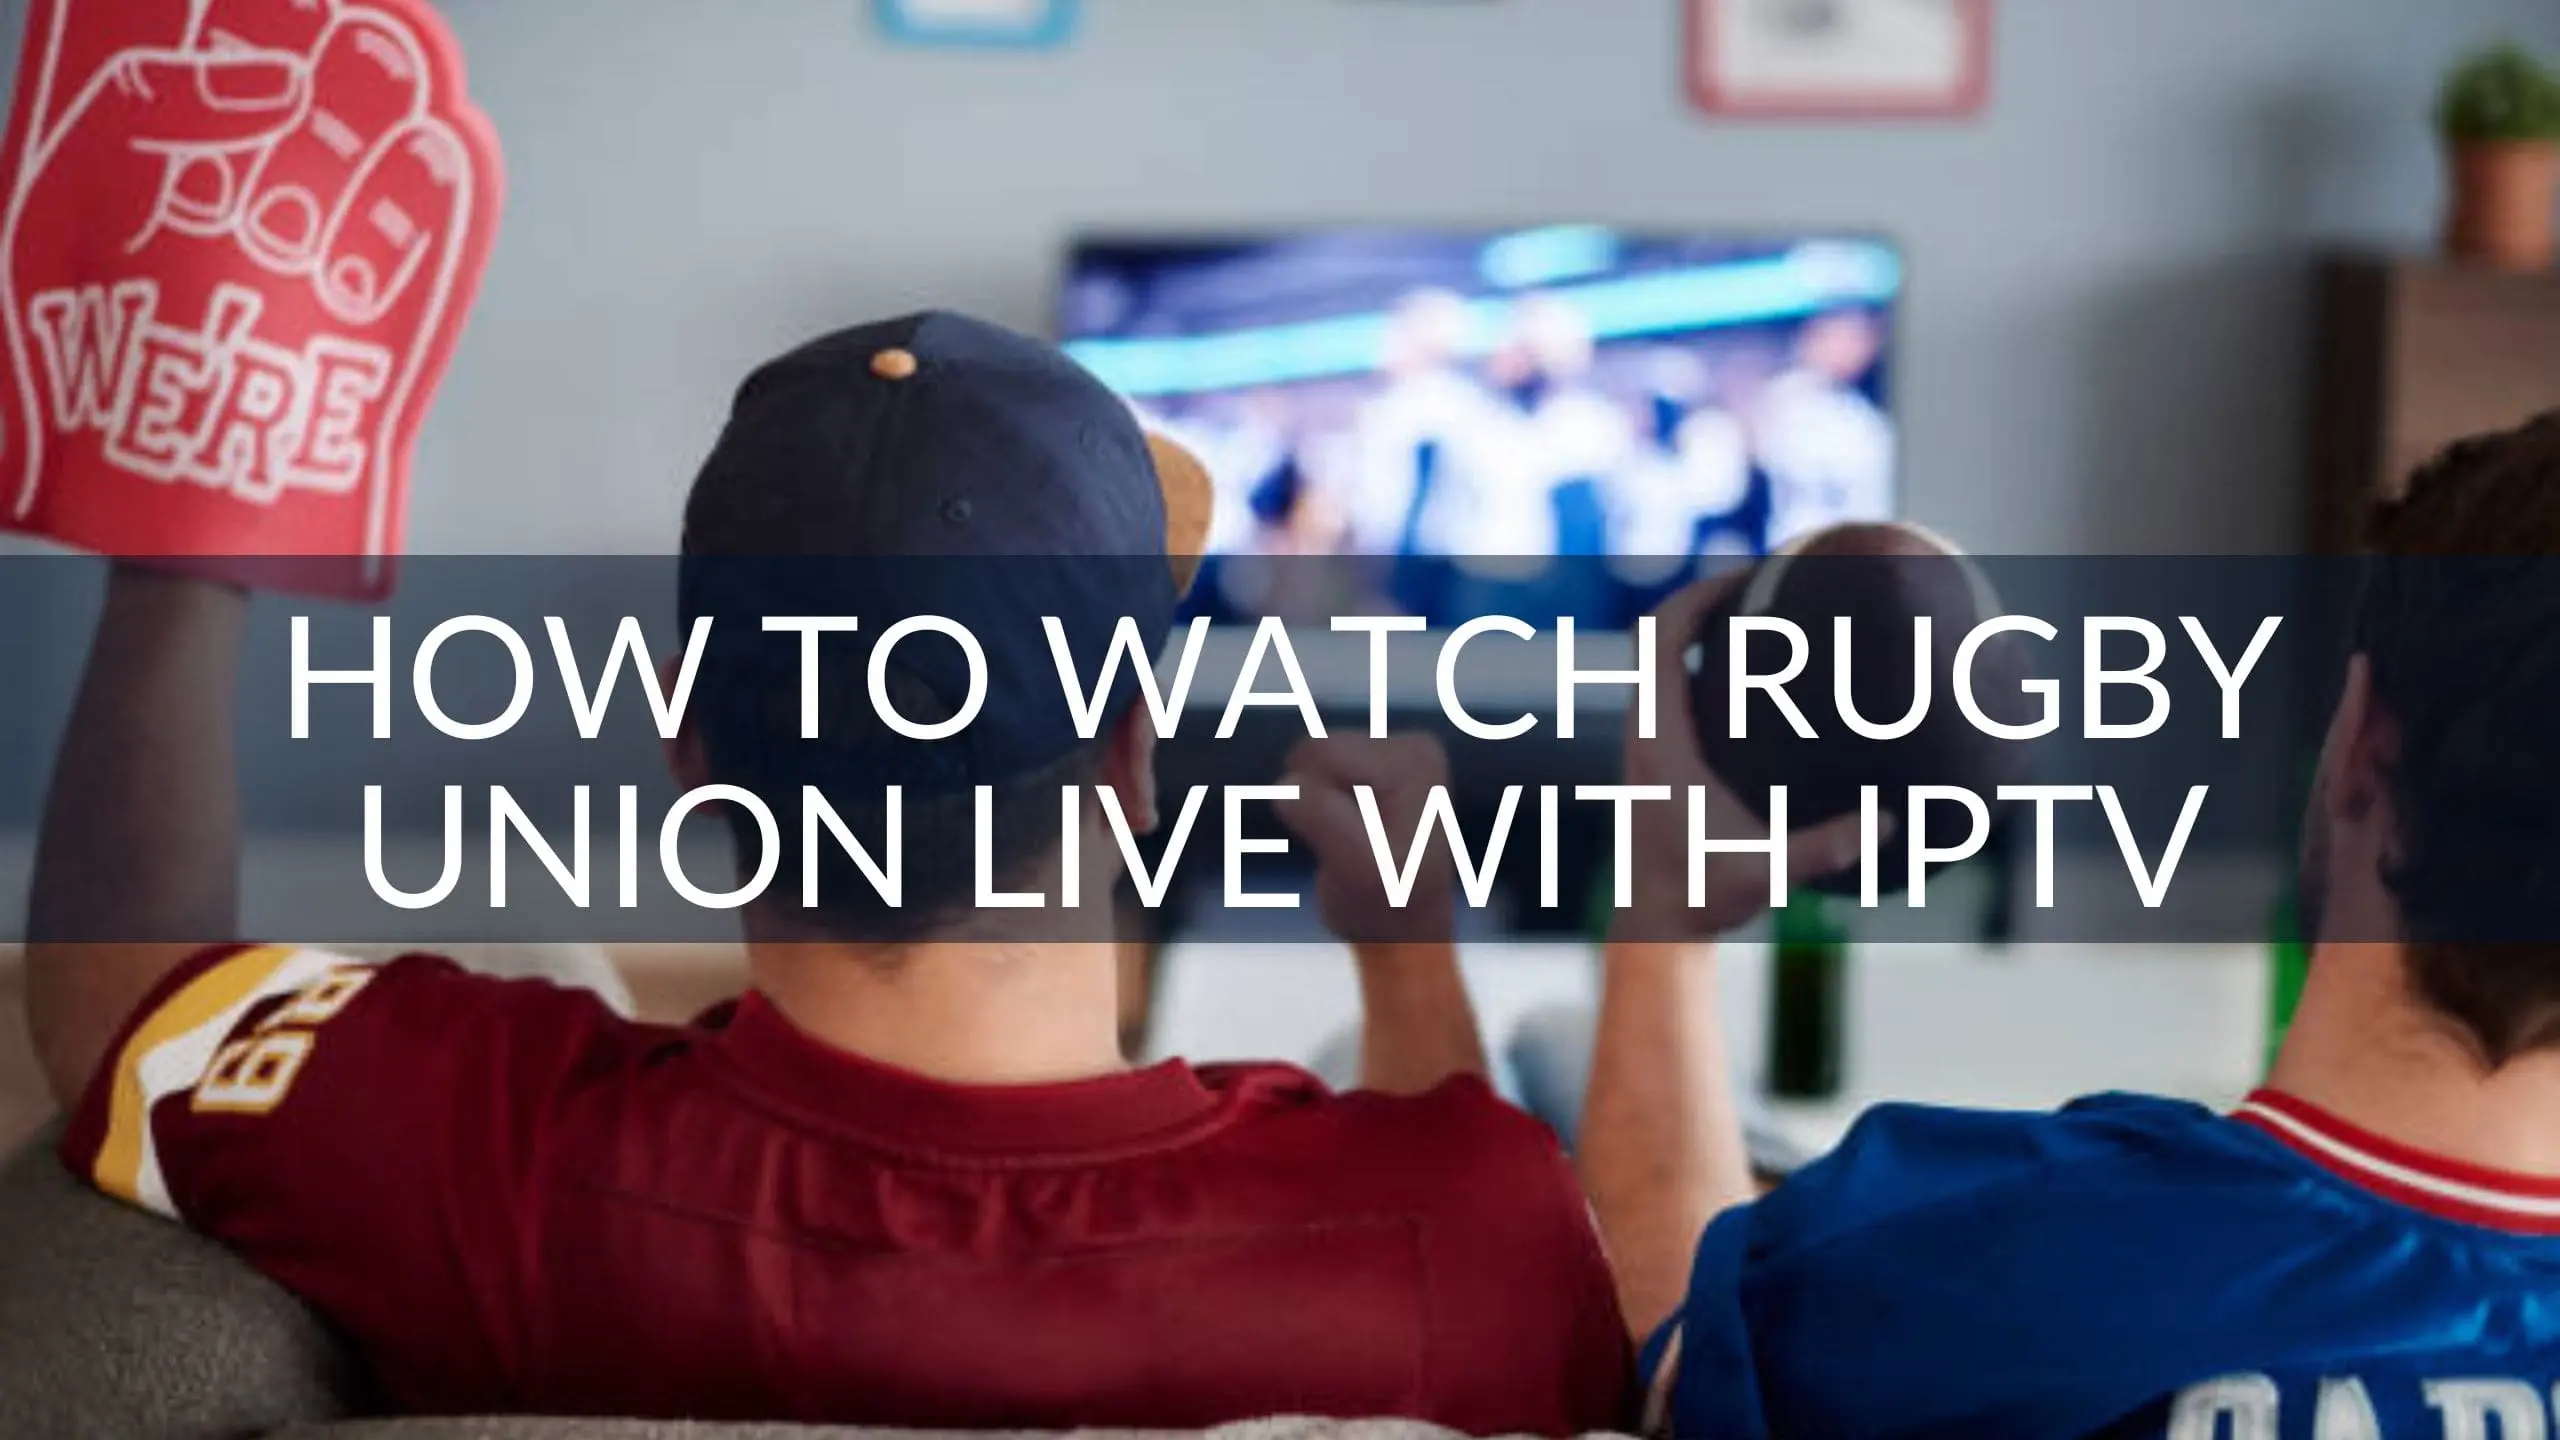 How to Watch Rugby Union Live Online with IPTV